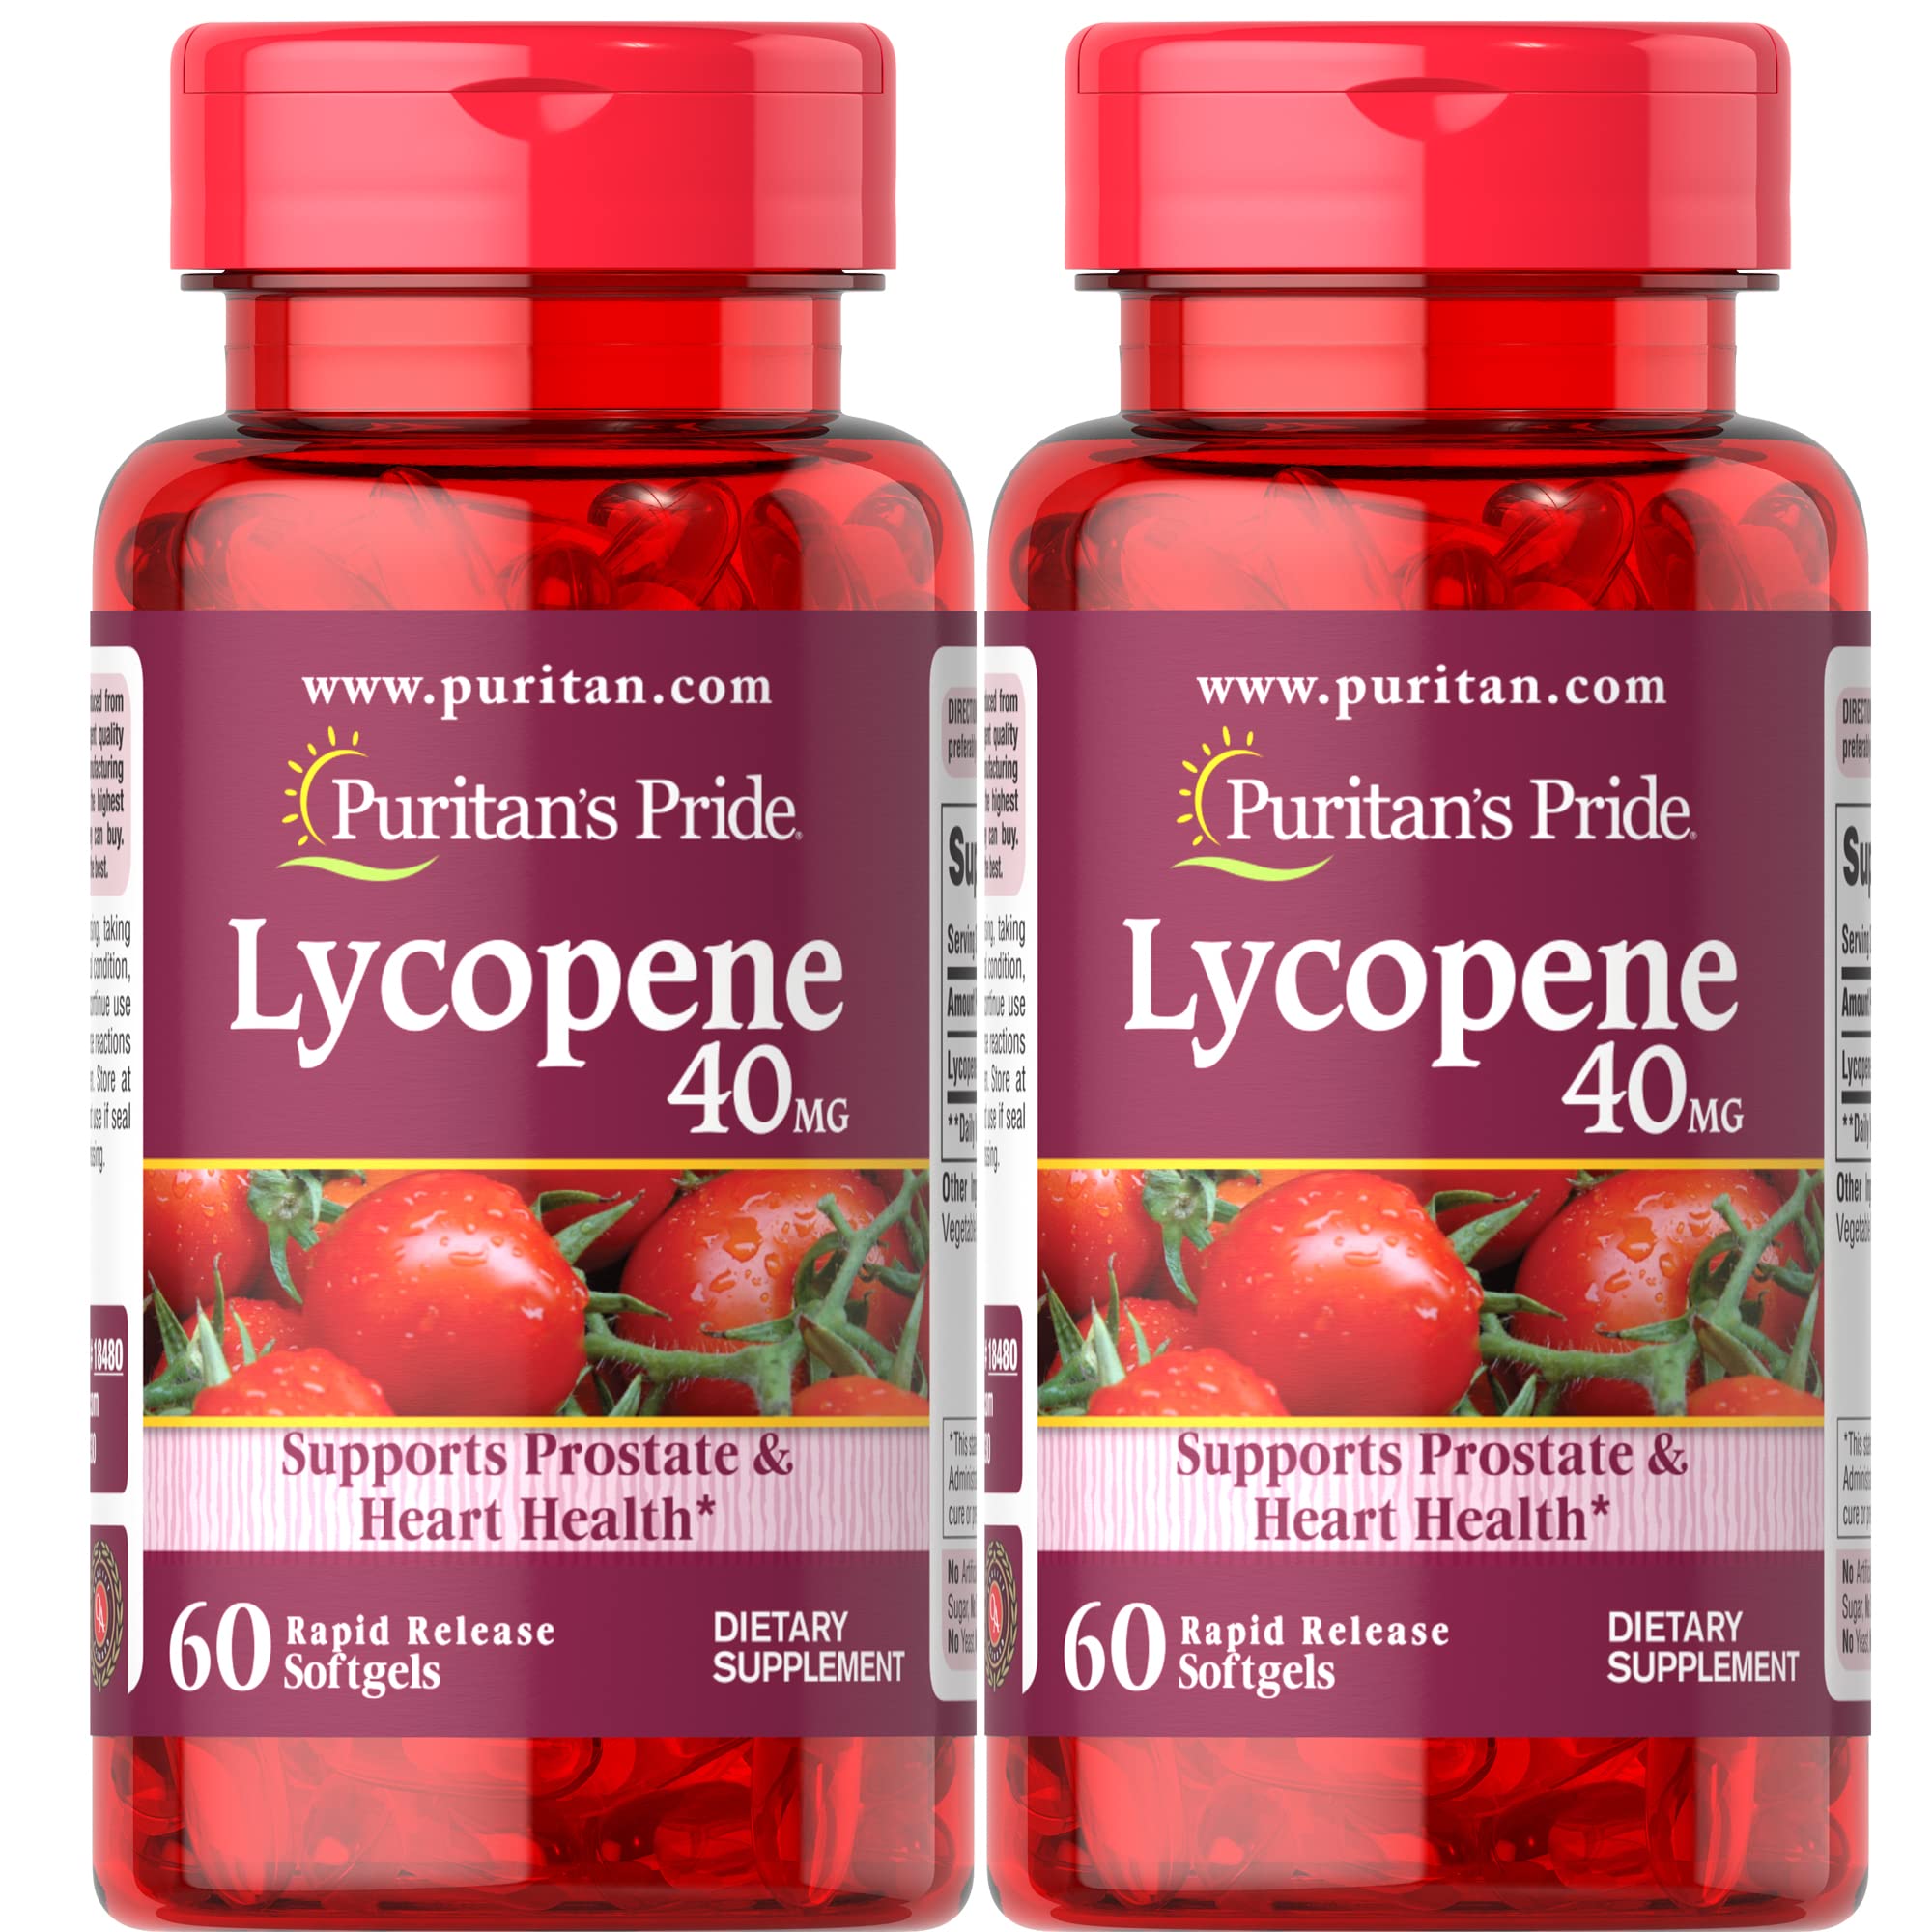 2-Pack 60-Count Puritan's Pride Lycopene Rapid Release Softgels (40mg) $13.83 w/ S&S + Free Shipping w/ Prime or on $35+